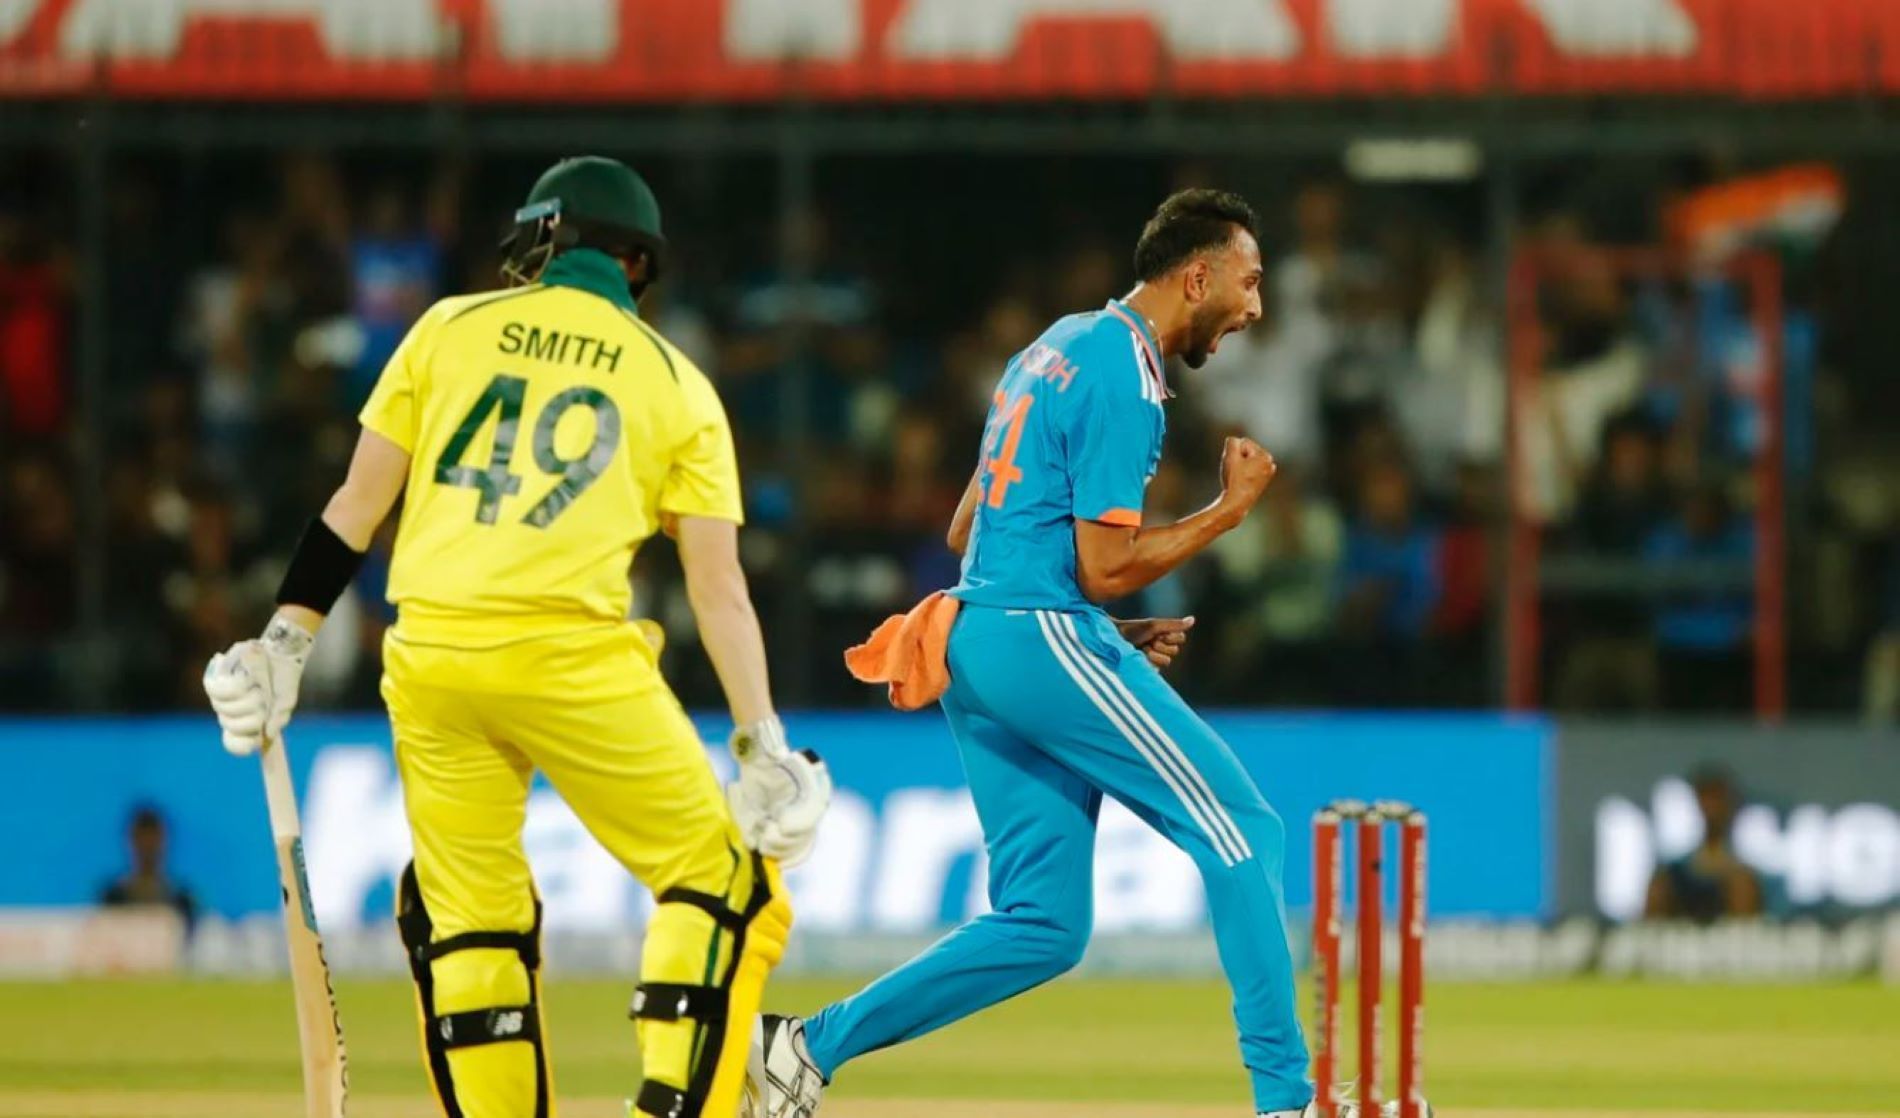 Smith was dismissed for a golden duck in the second ODI at Indore.